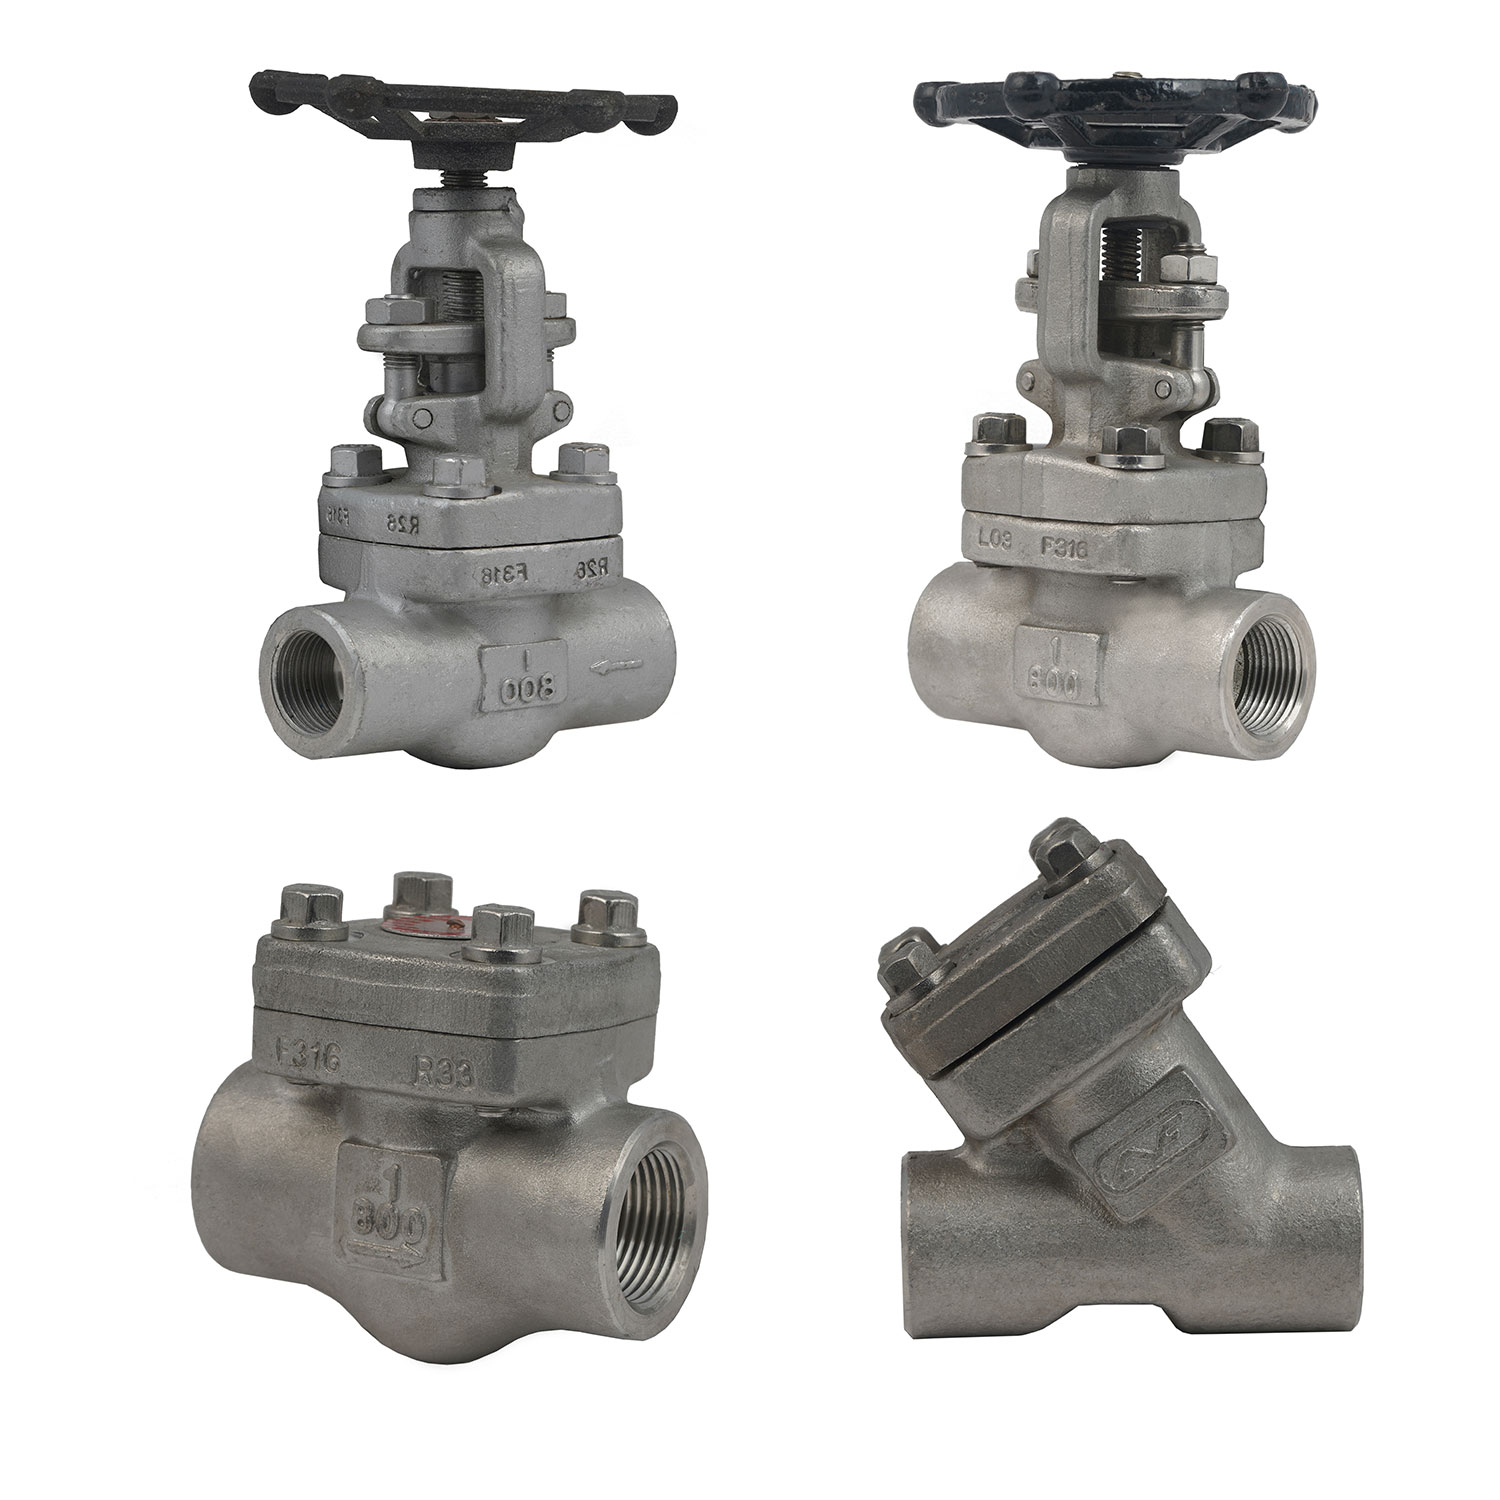 Class 800 (N.P.T) And (S.W) Forged Steel Valves (F316) With (LVF) Brand